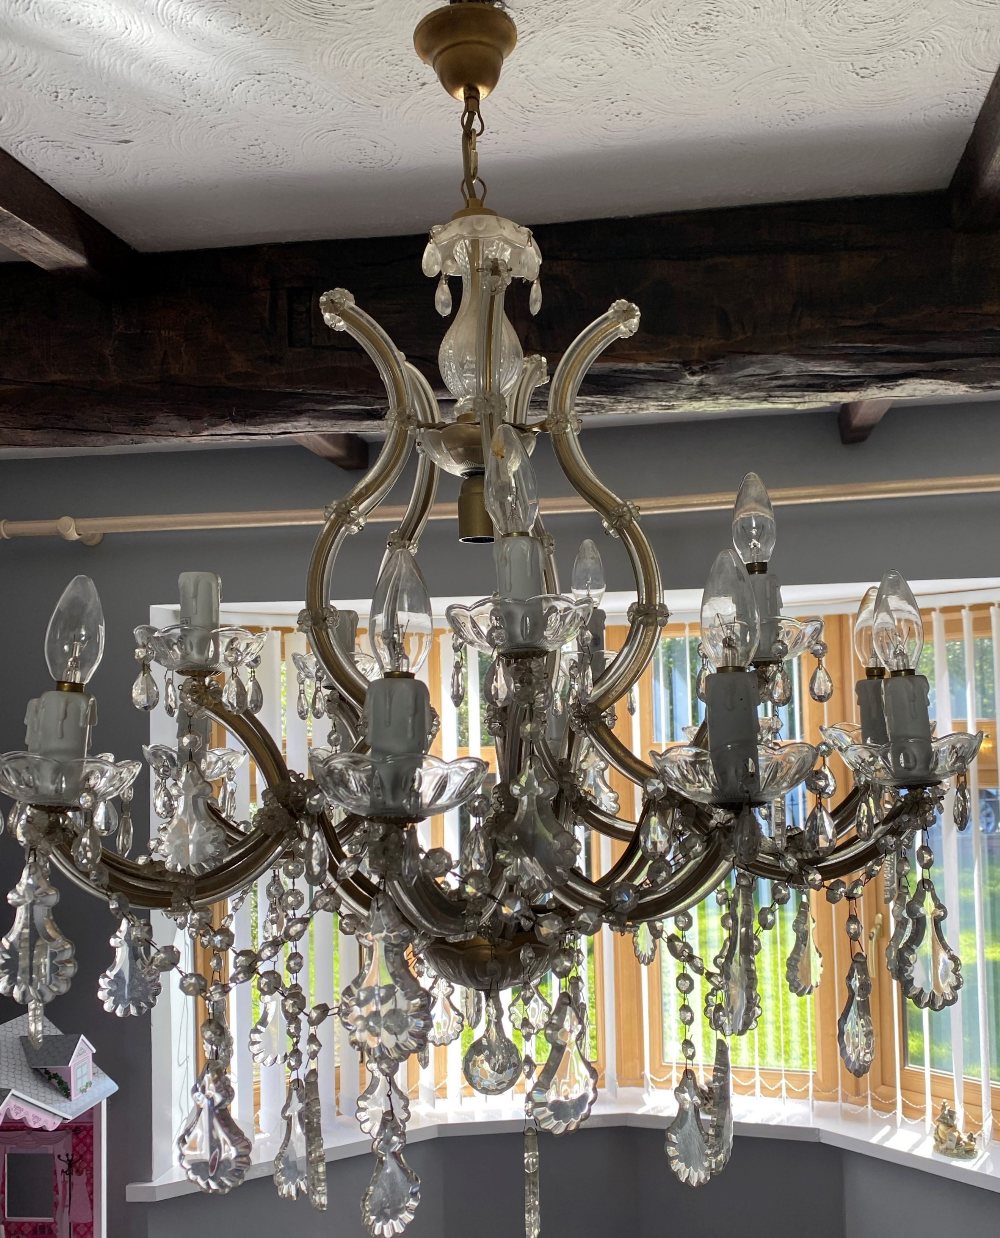 A LARGE TRADITIONAL MURANO STYLE FIFTEEN BRANCH CRYSTAL CHANDELIER, with numerous size and shaped